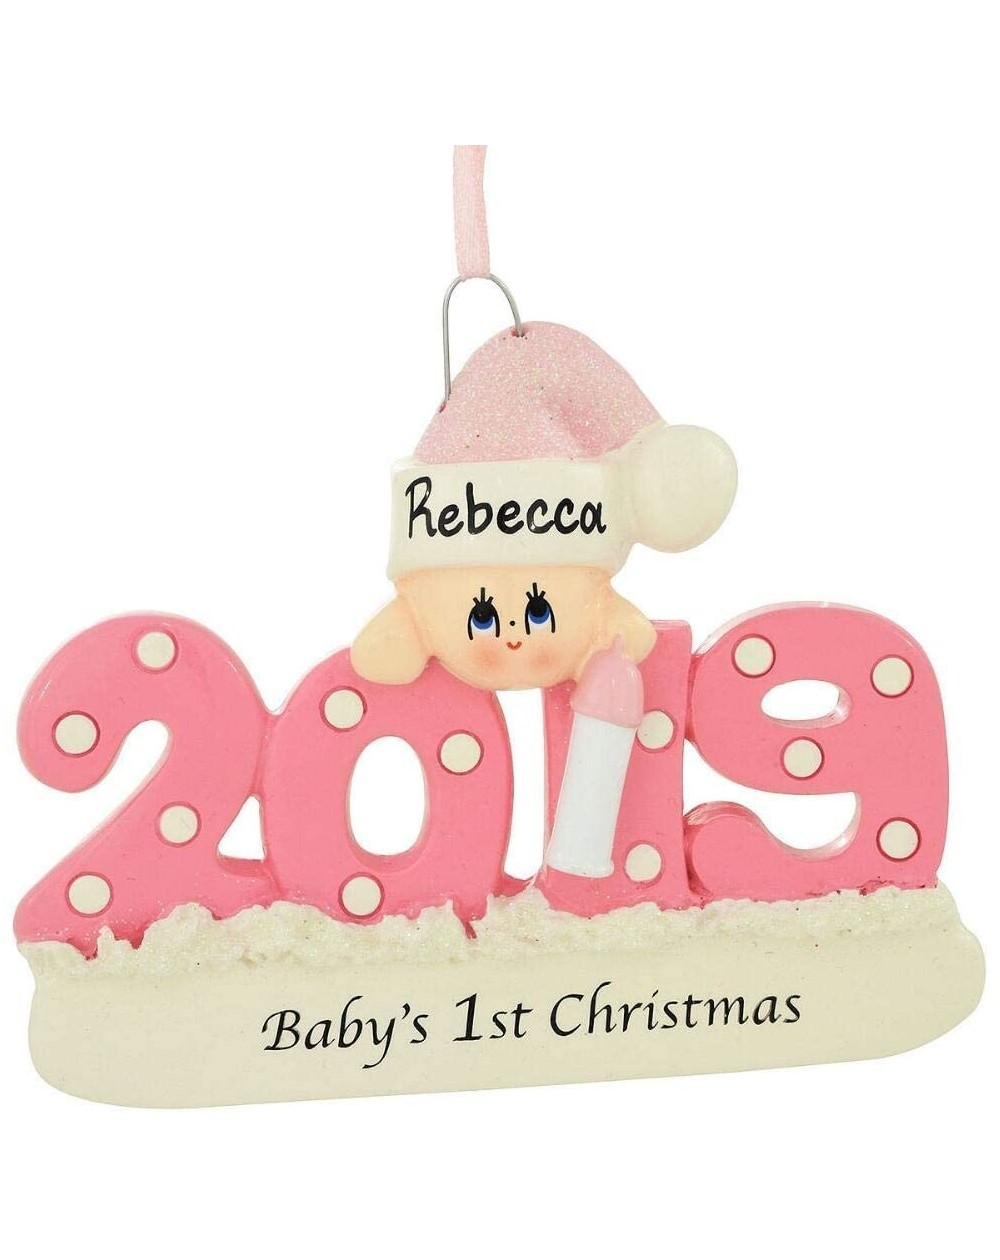 Ornaments Baby's First Xmas Ornament 2019 - Pink/Girl - Includes Personalization - CR1266Y4G2N $18.53